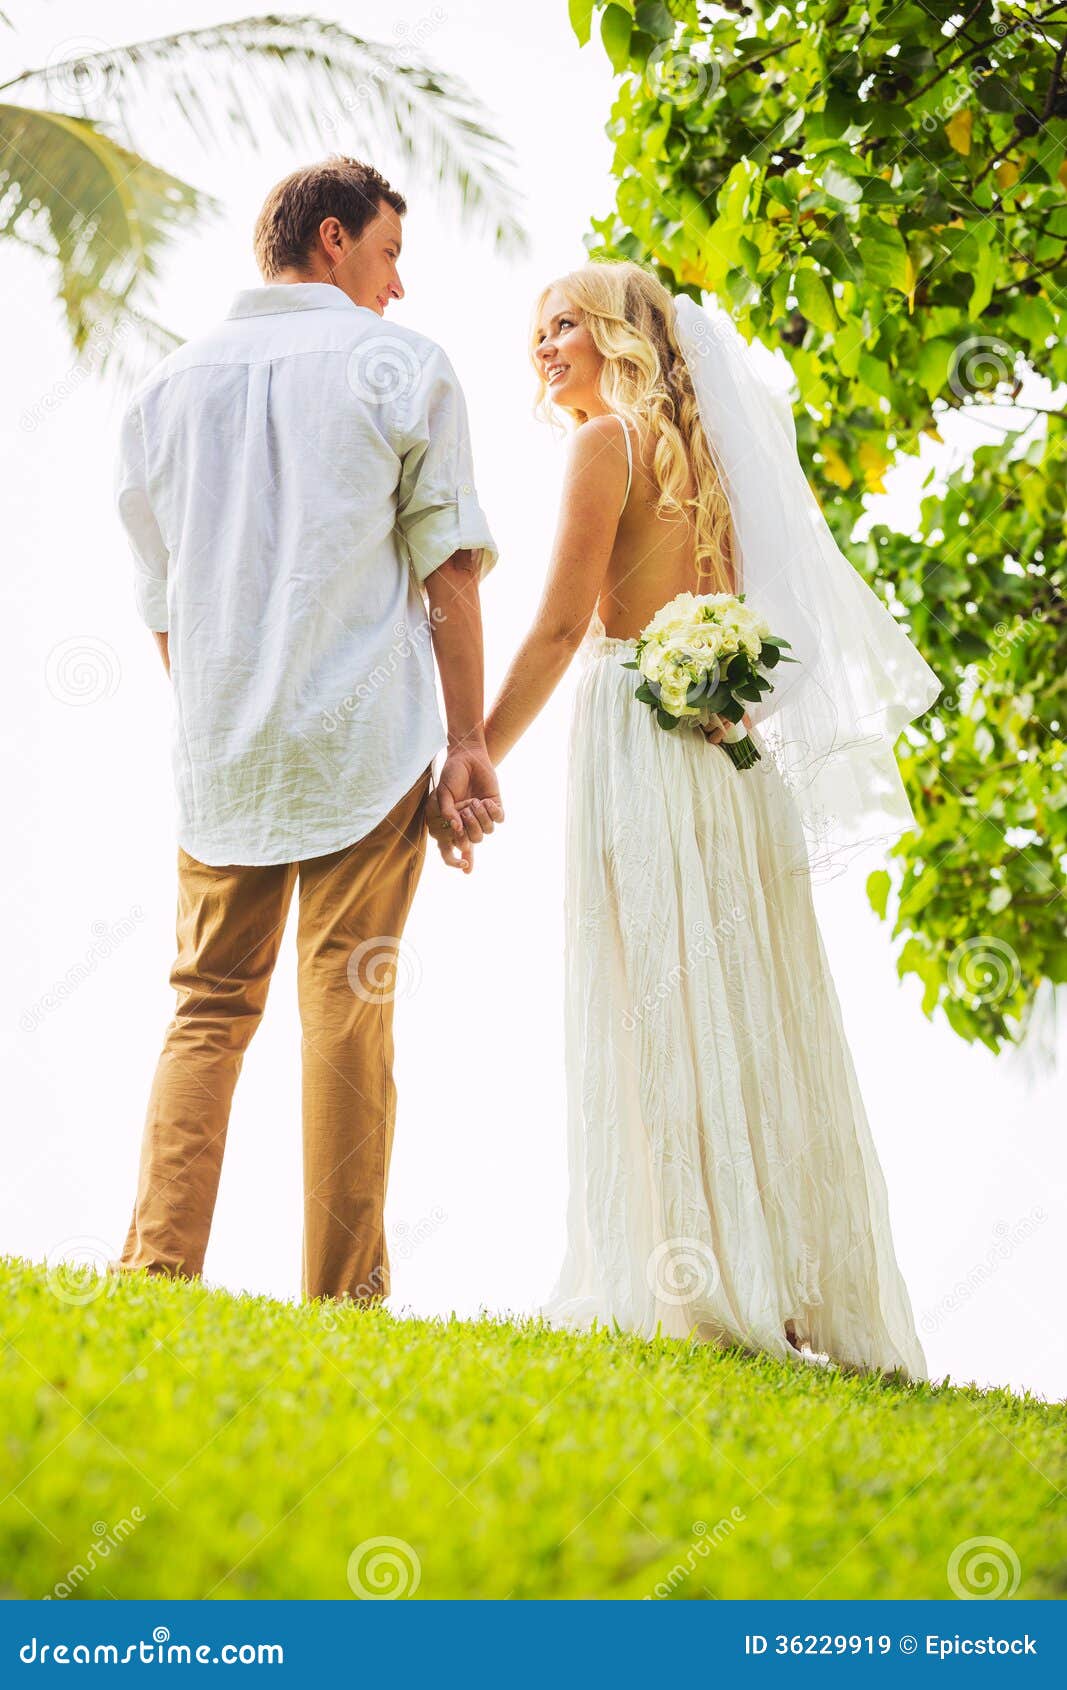 Just Married Couple Holding Hands Stock Image Image Of Holiday Happiness 36229919